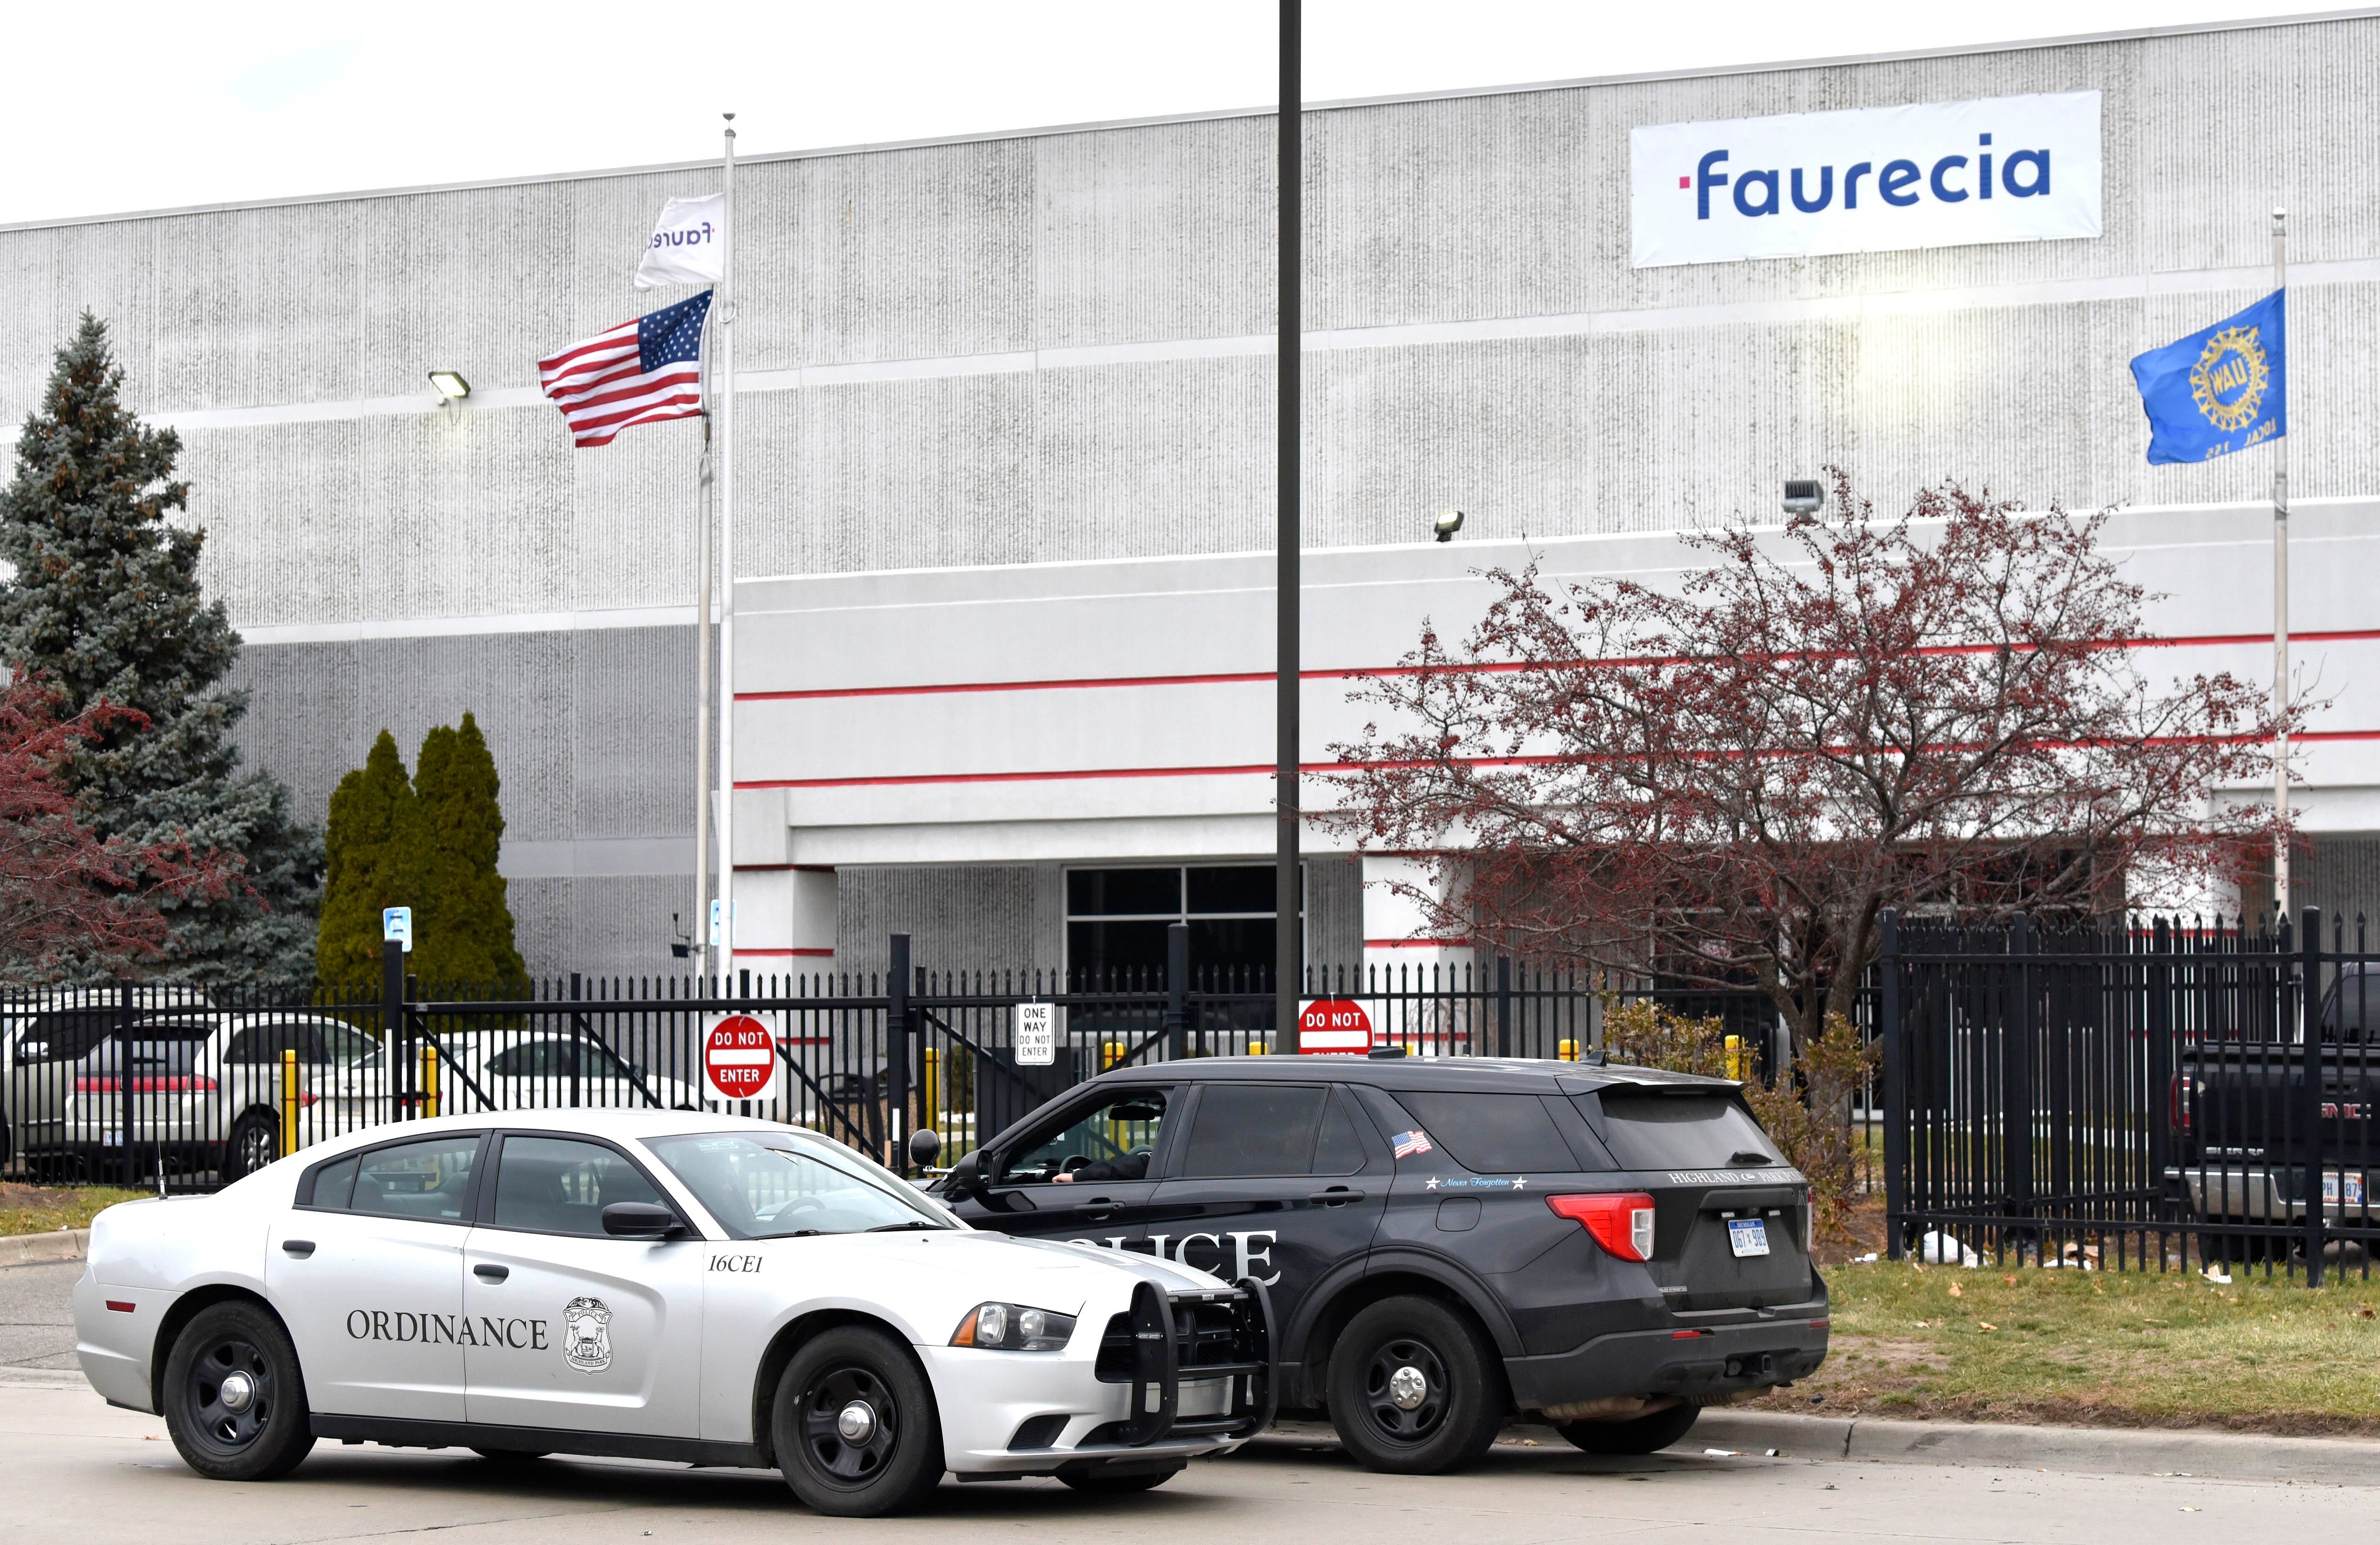 Highland Park police officers investigate the scene of a deadly shooting in the front parking lot of the Faurecia plant in Highland Park, Wednesday afternoon, December 14, 2022.